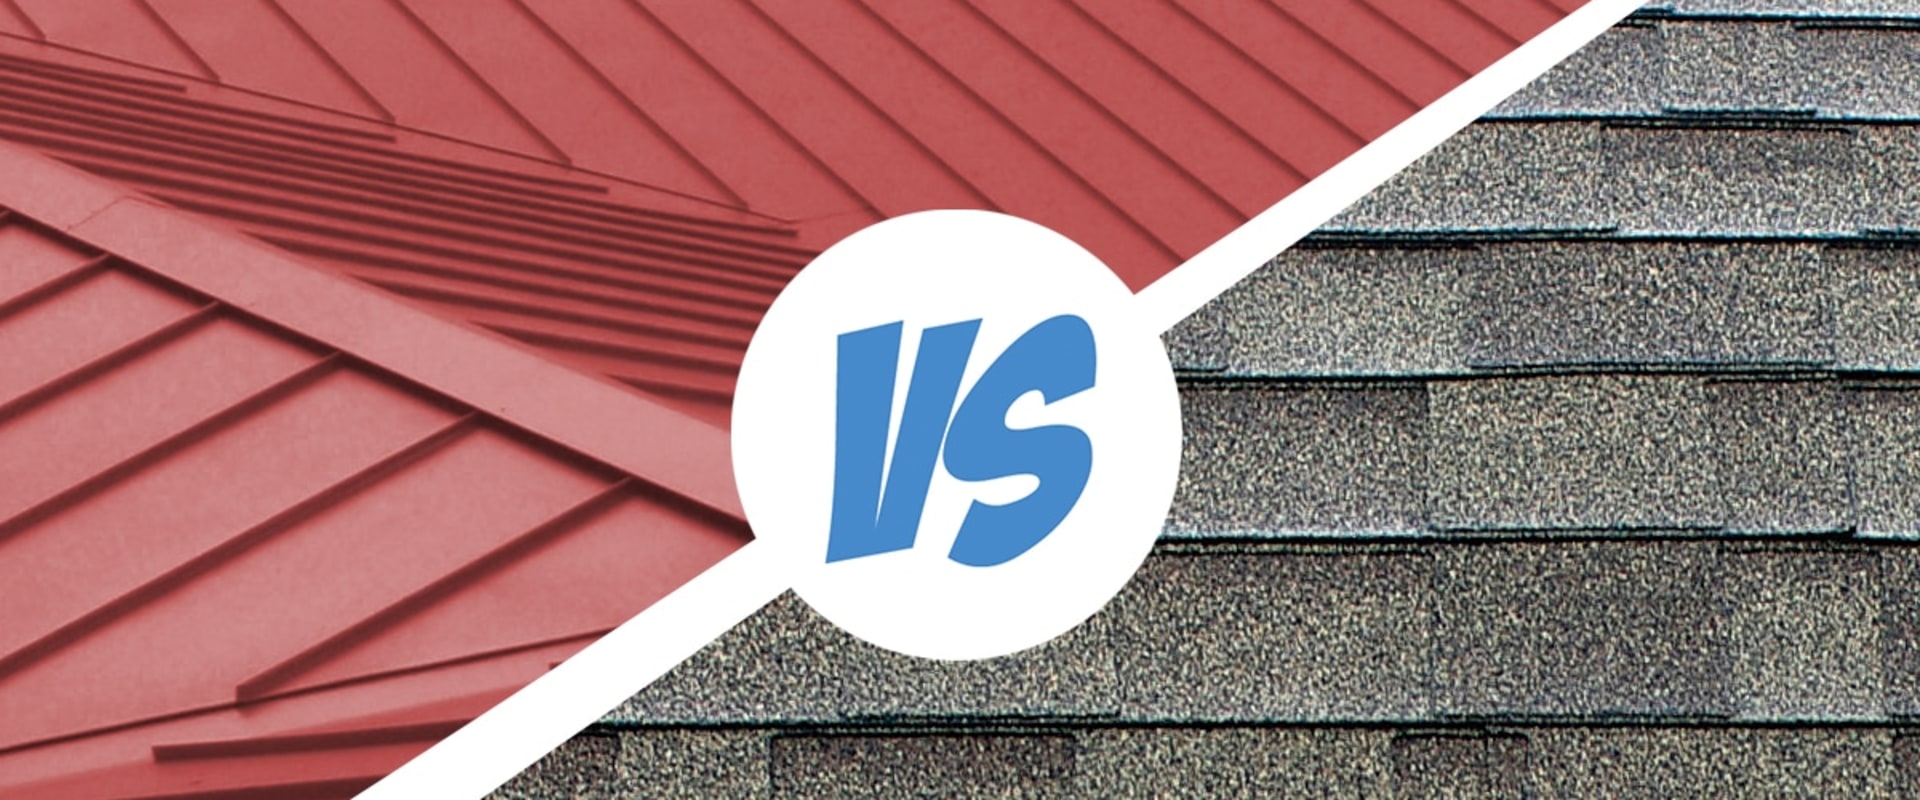 How much more is a metal roof than a shingle roof?